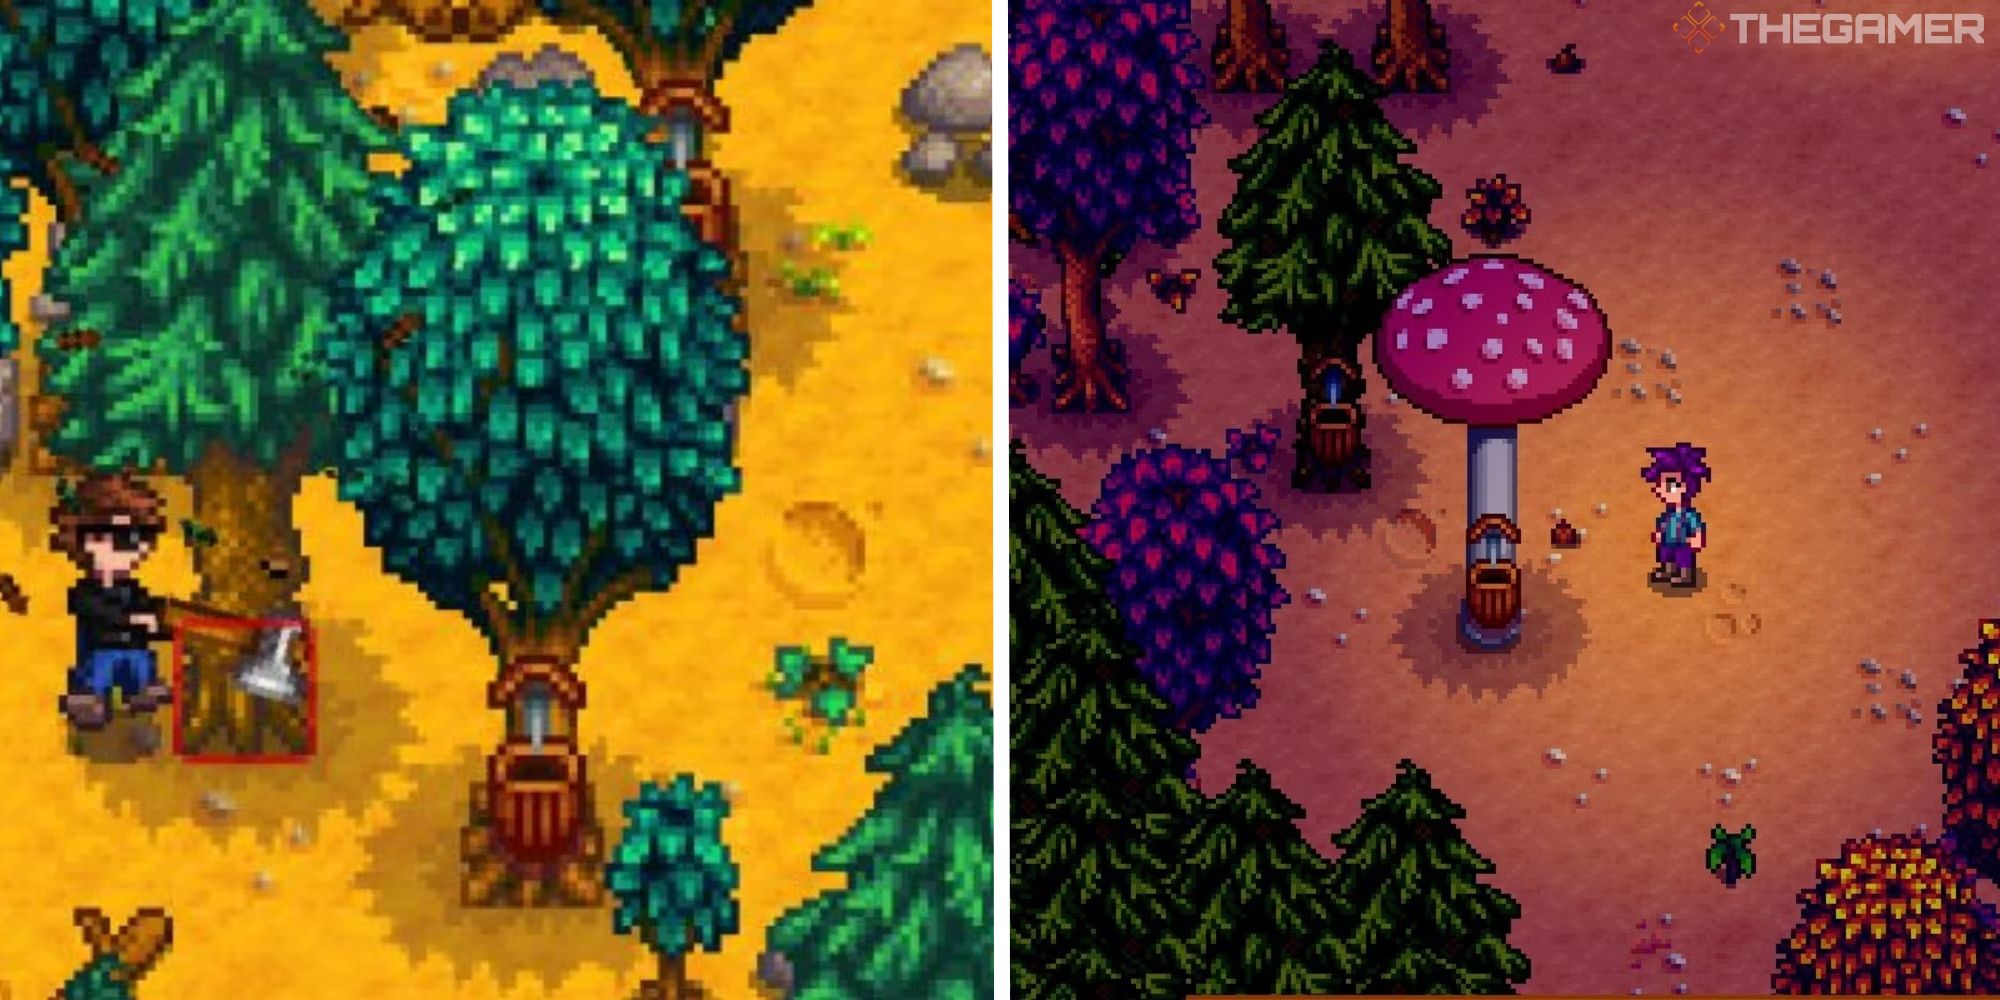 split image showing tapper on normal tree and tapper on mushroom tree